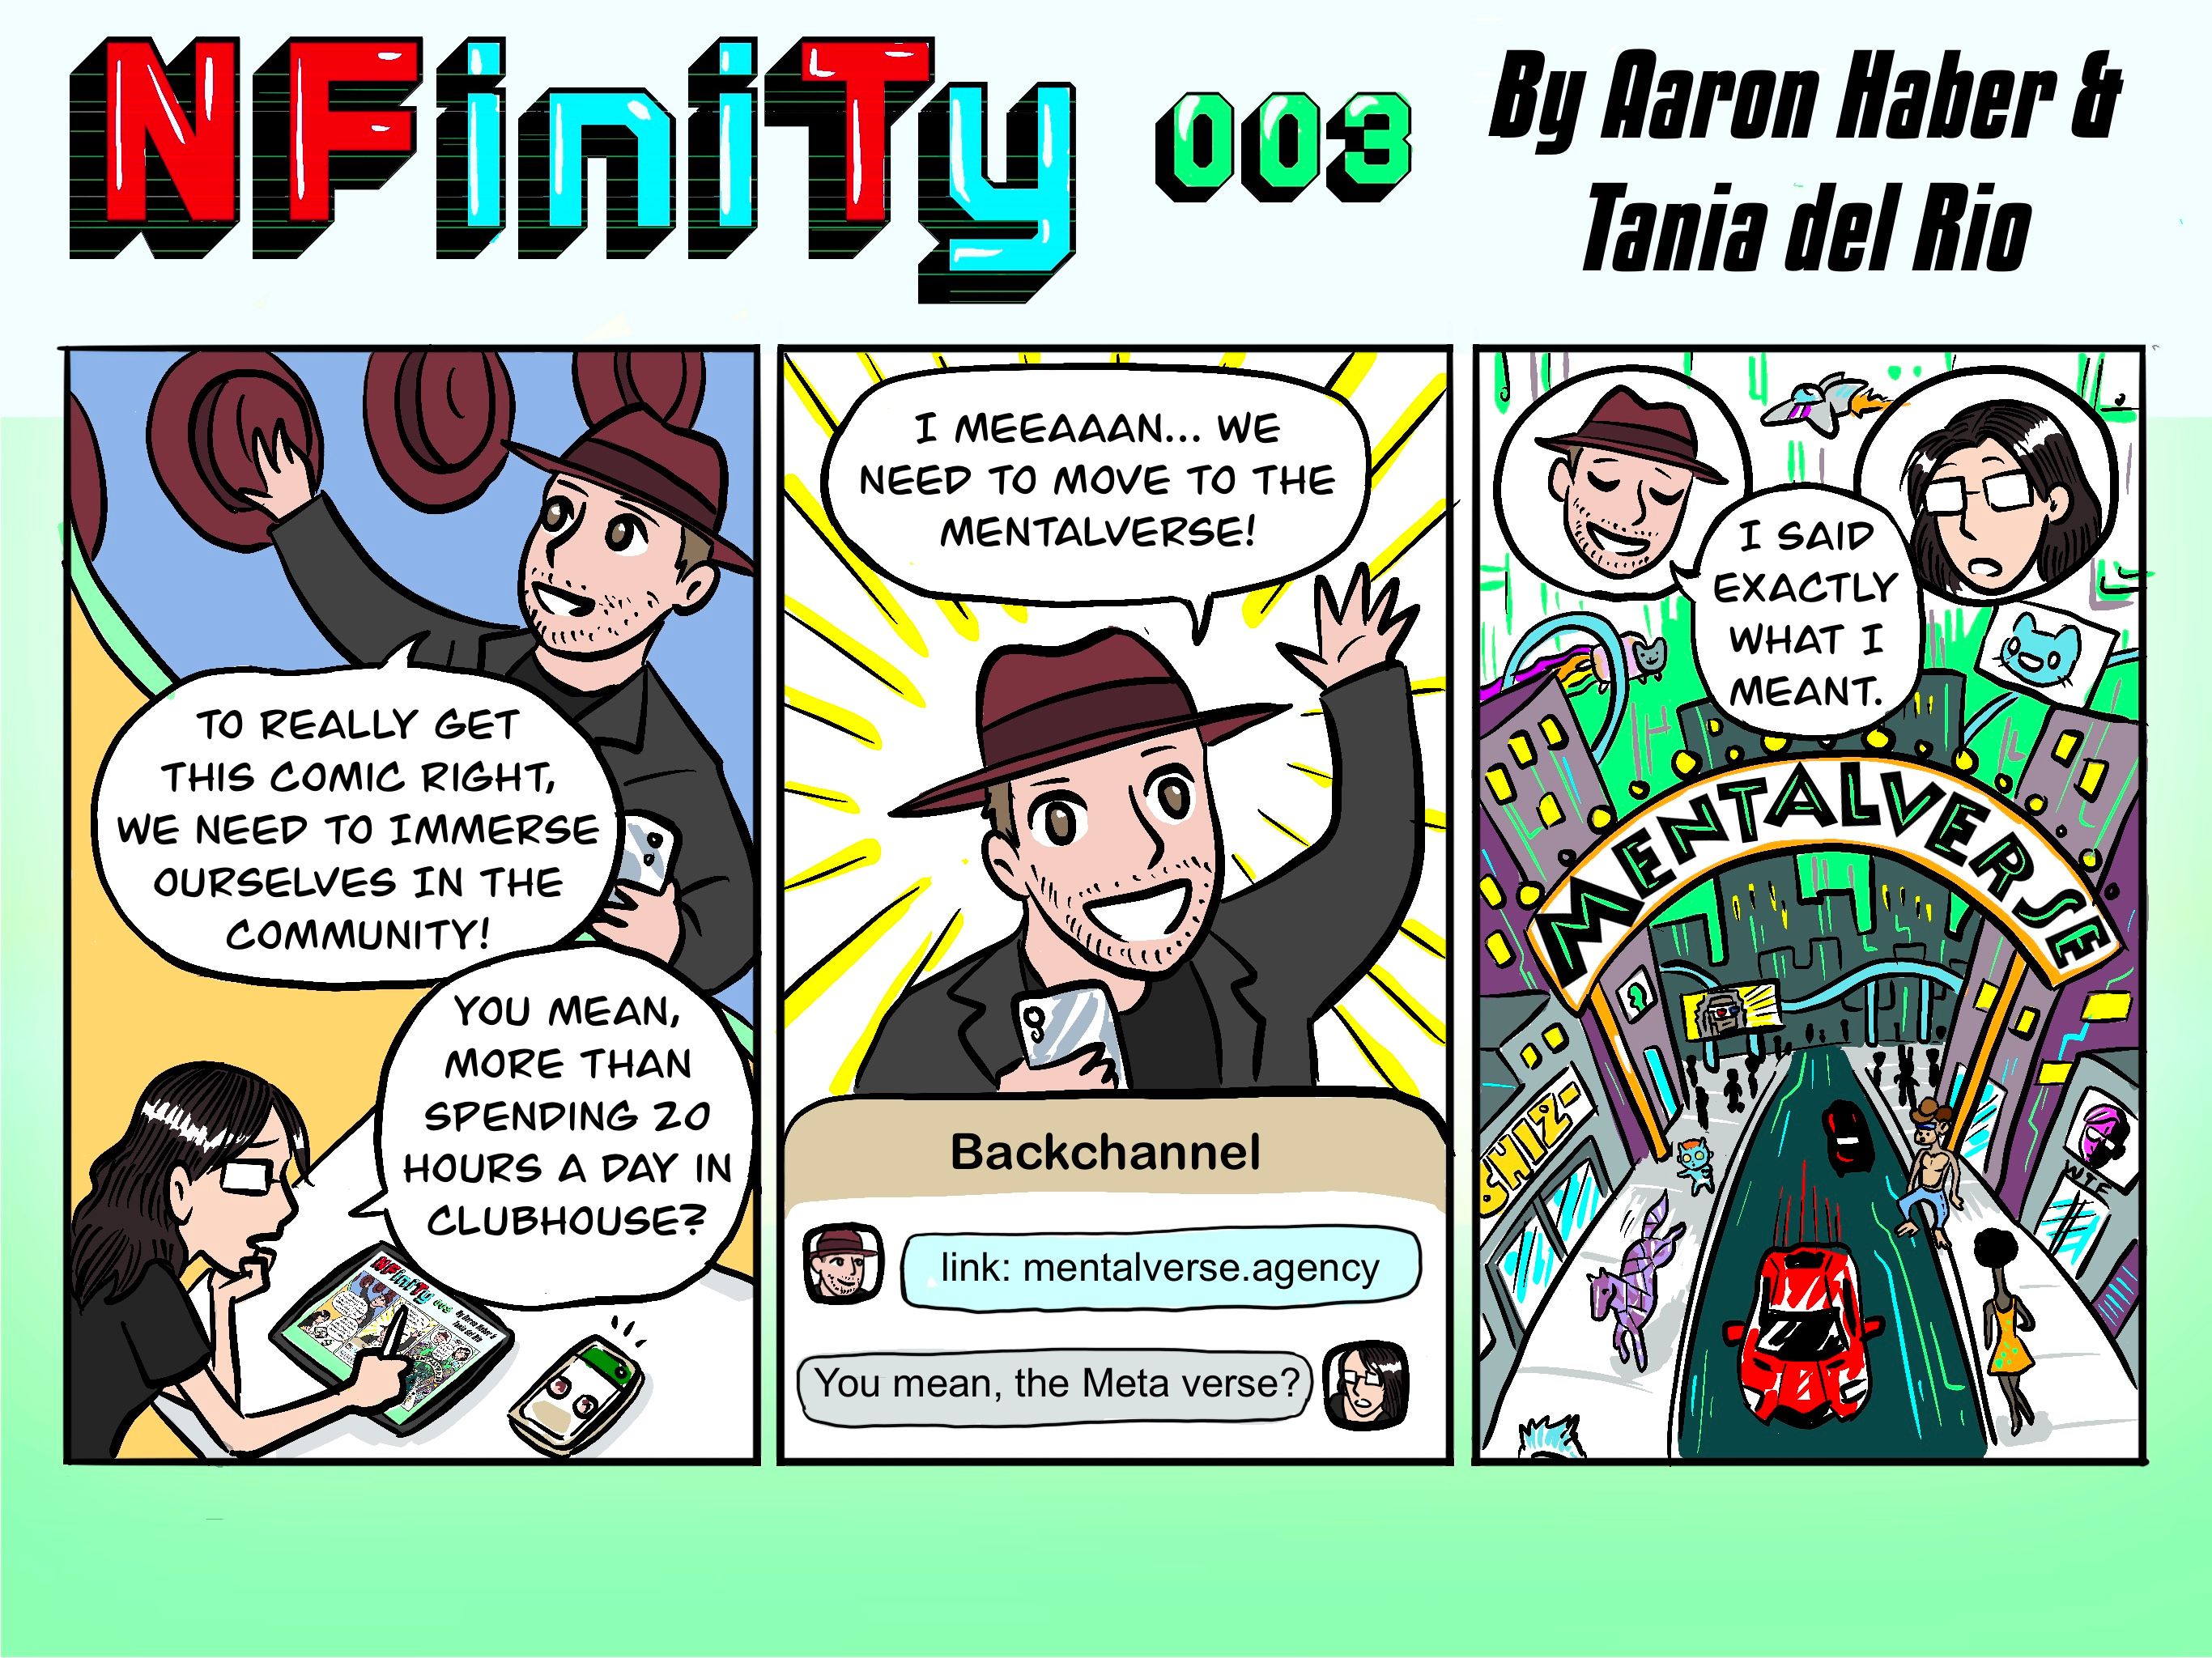 NFiniTy: The Comic Strip Series - Episode 003